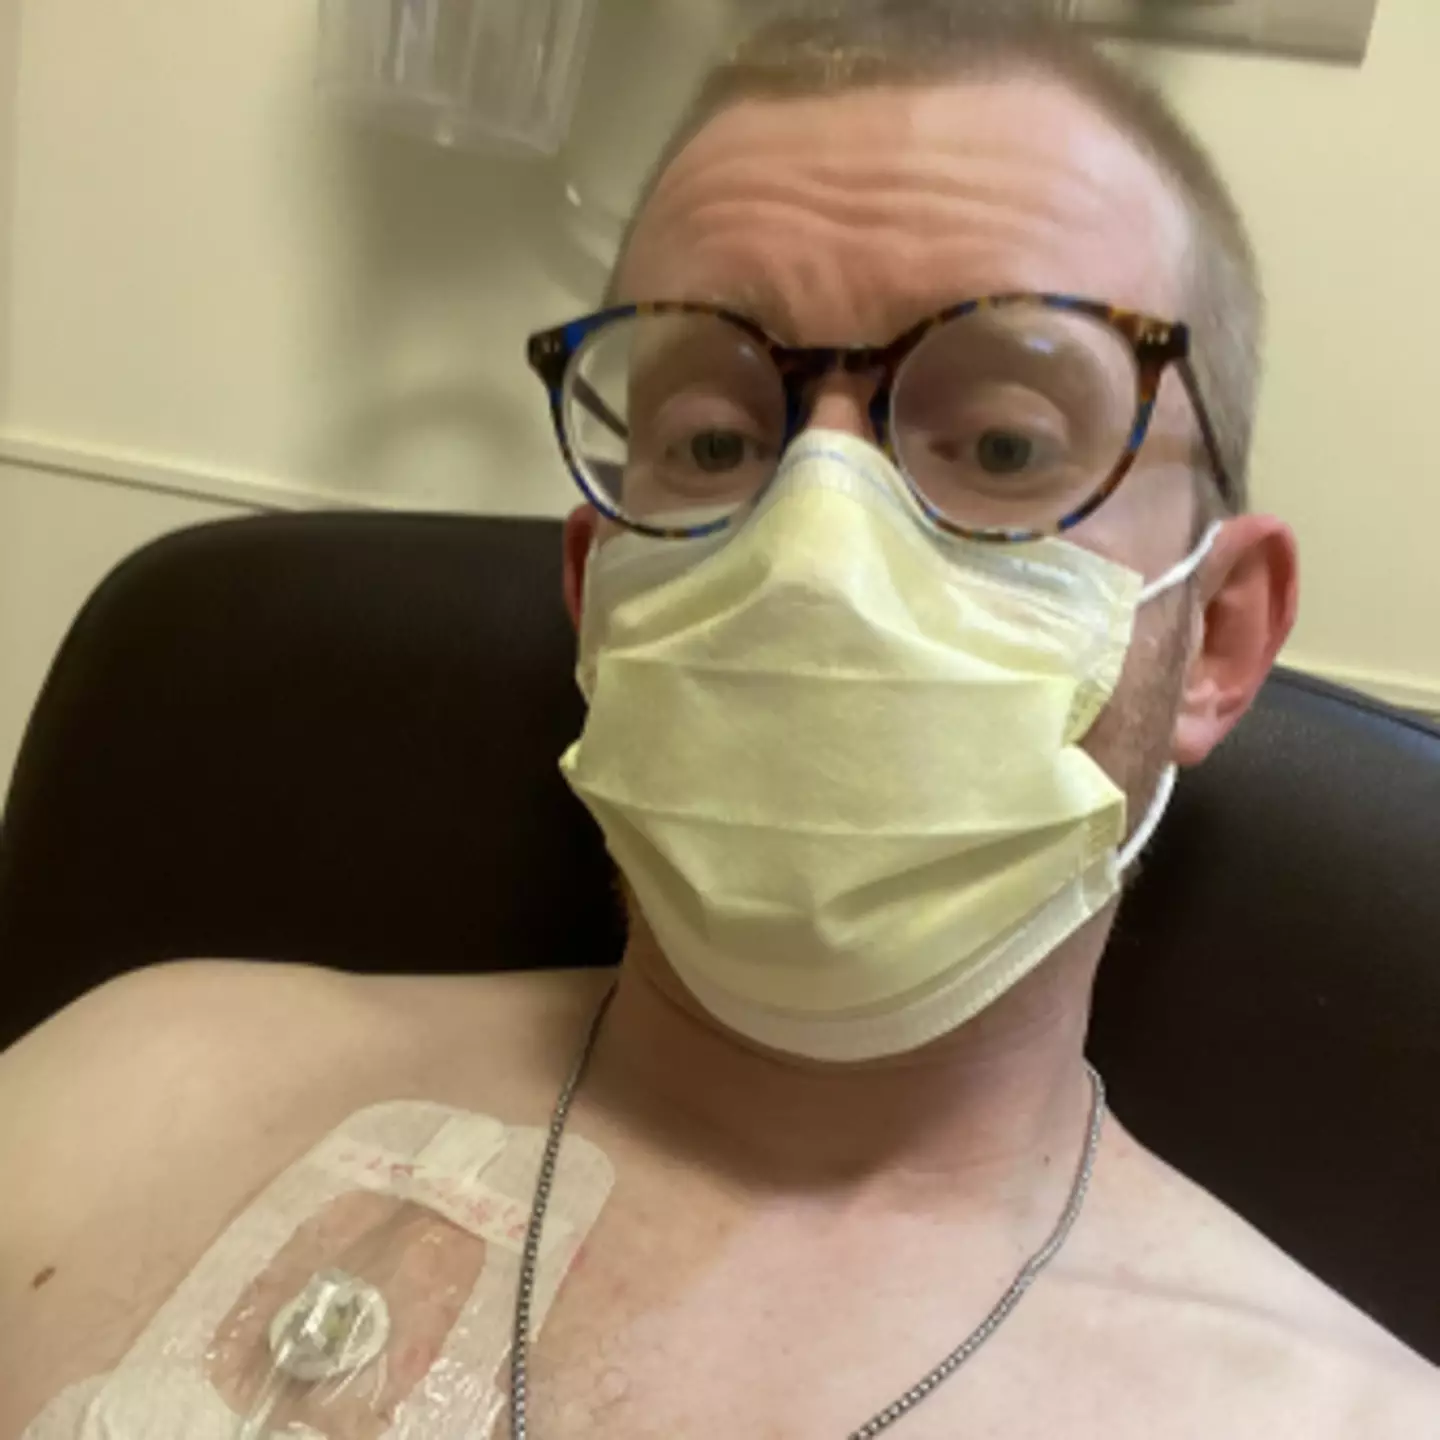 Matthew has responded well to chemo. (The Patient Story)